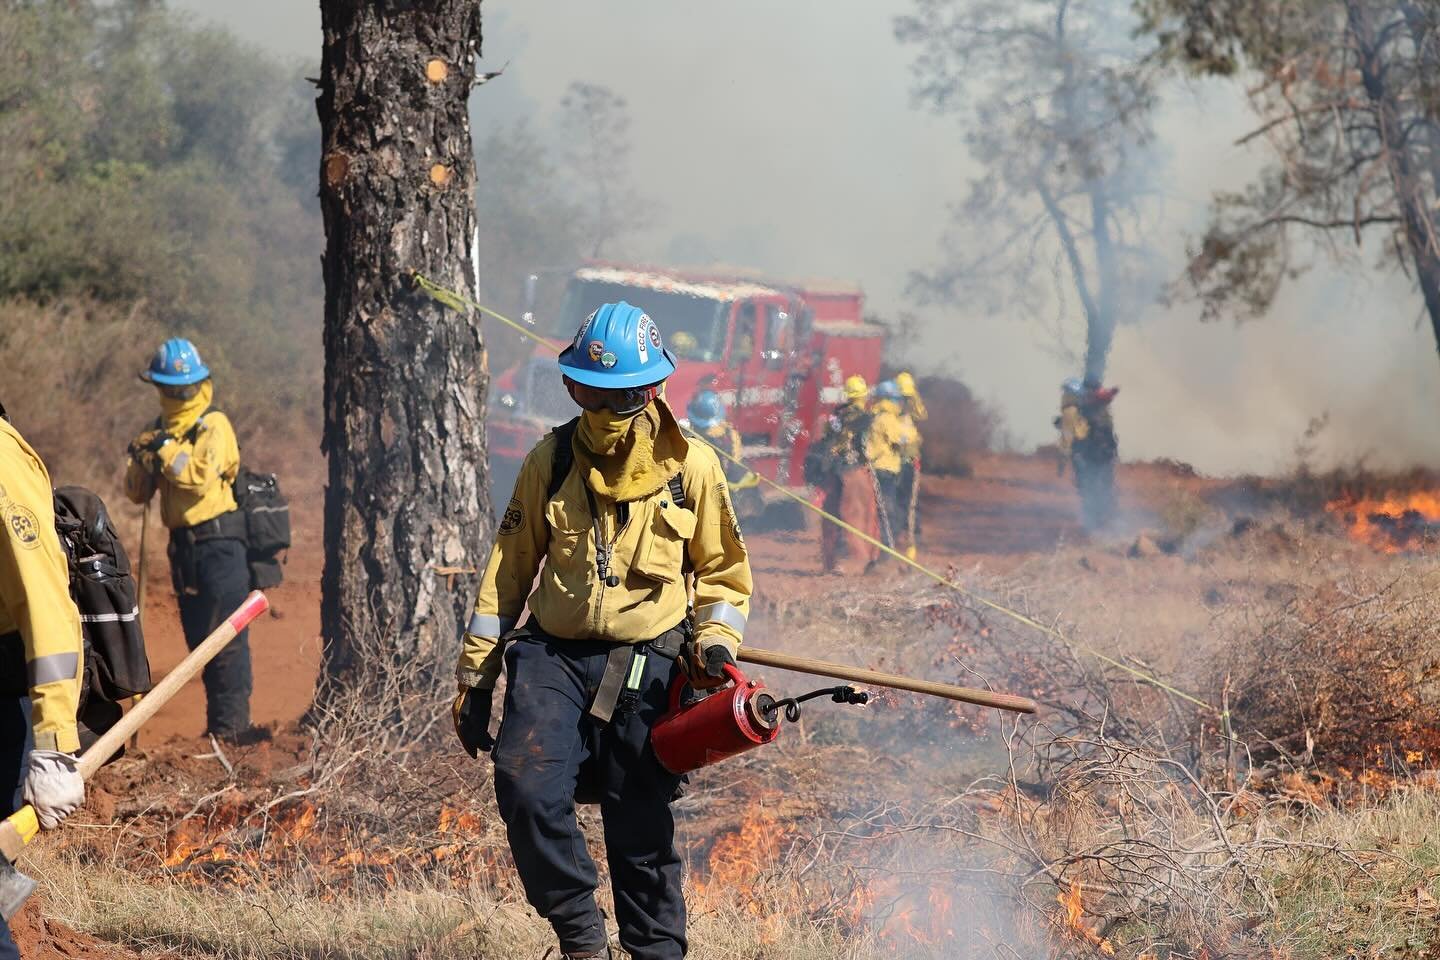 Get Ready to Rise to the Challenge! 💪
&nbsp;
Wildland Fire Season 2024 approaches, and all your training is about to pay off.
&nbsp;
You are the frontline heroes who protect our lands.
&nbsp;
Stay safe, stay strong, and know we&rsquo;re behind you e